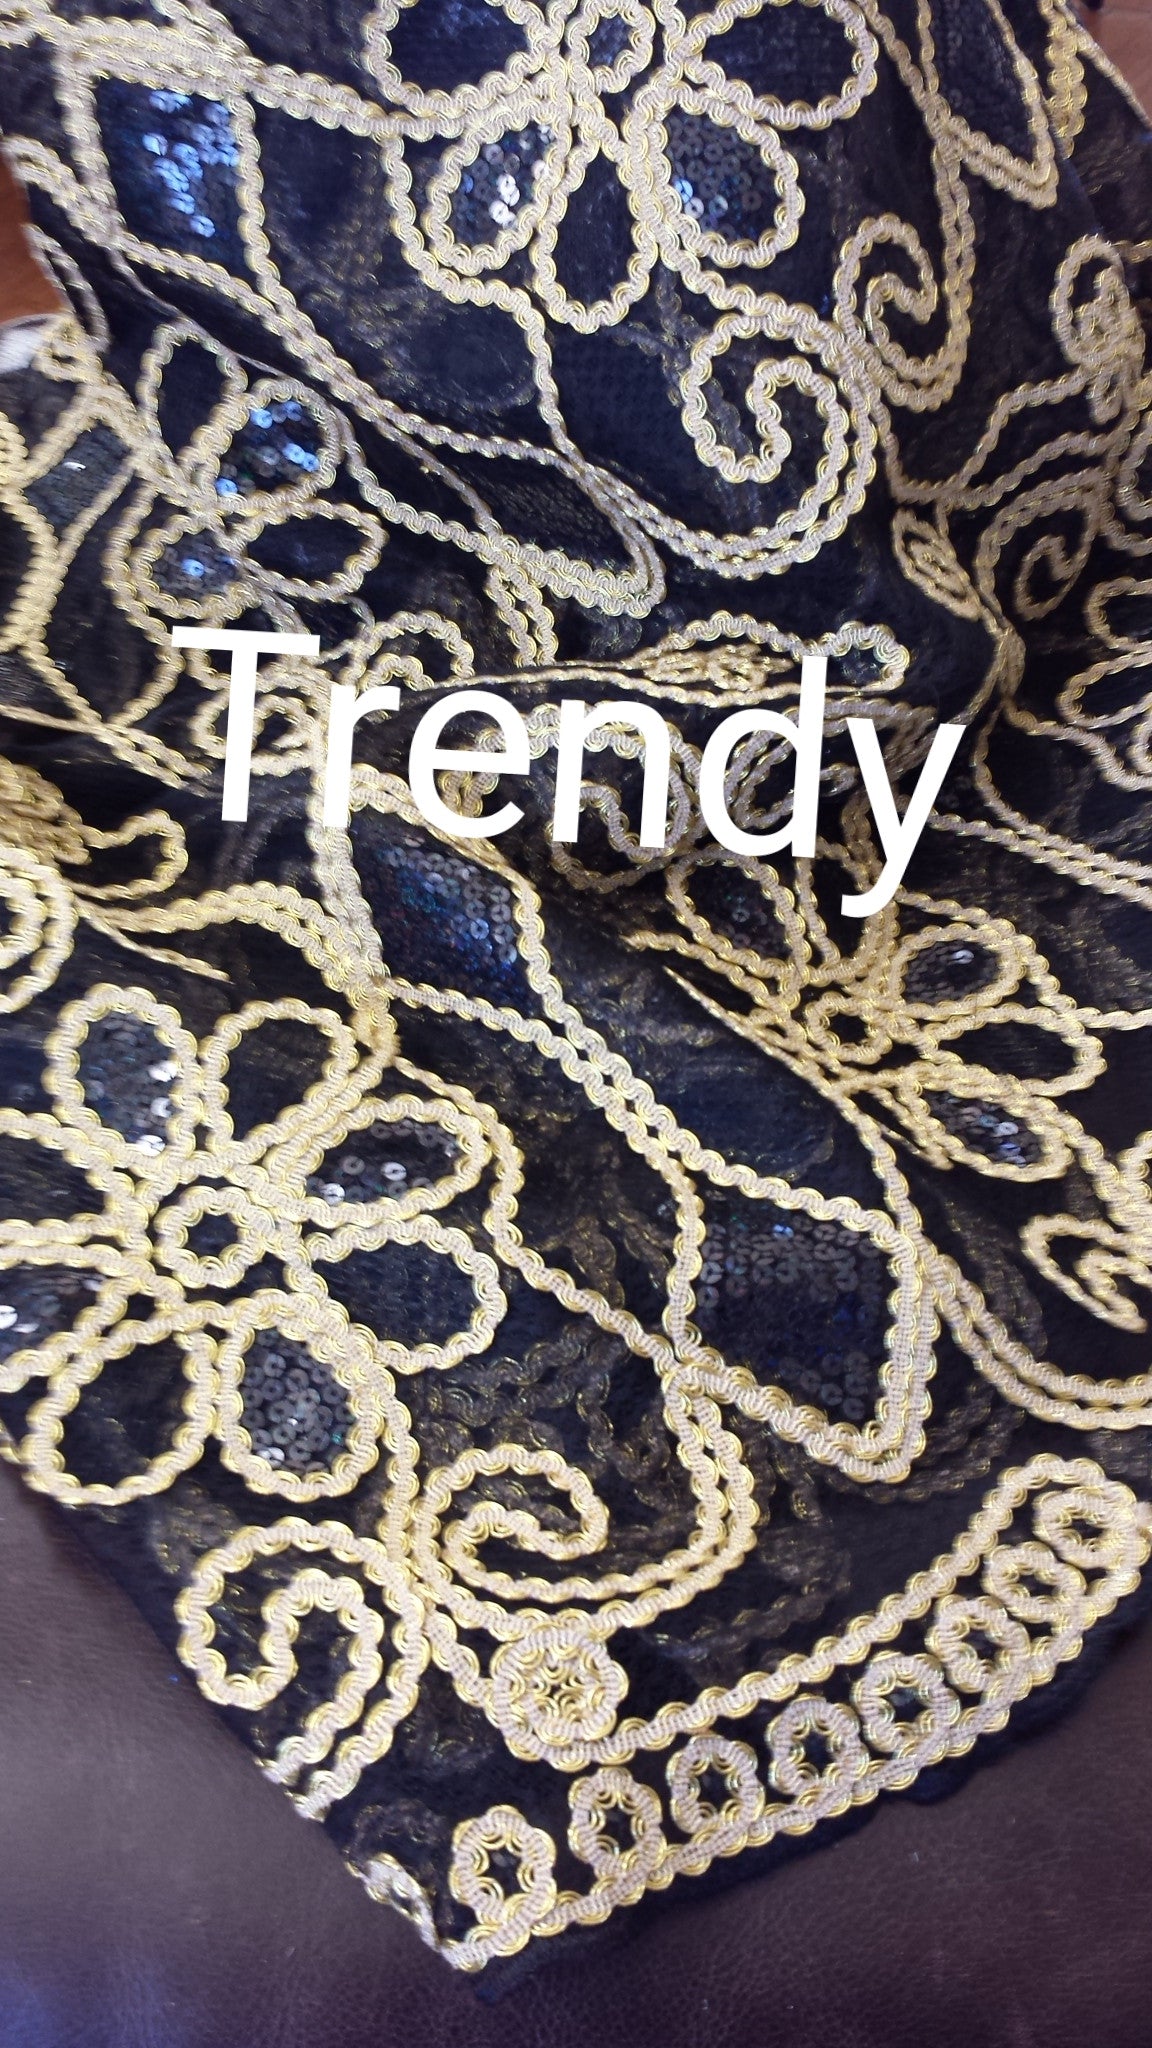 Black/gold Net French lace fabric for Nigerian party dress. Soft, quality lace fabric. Sold as 5 yards